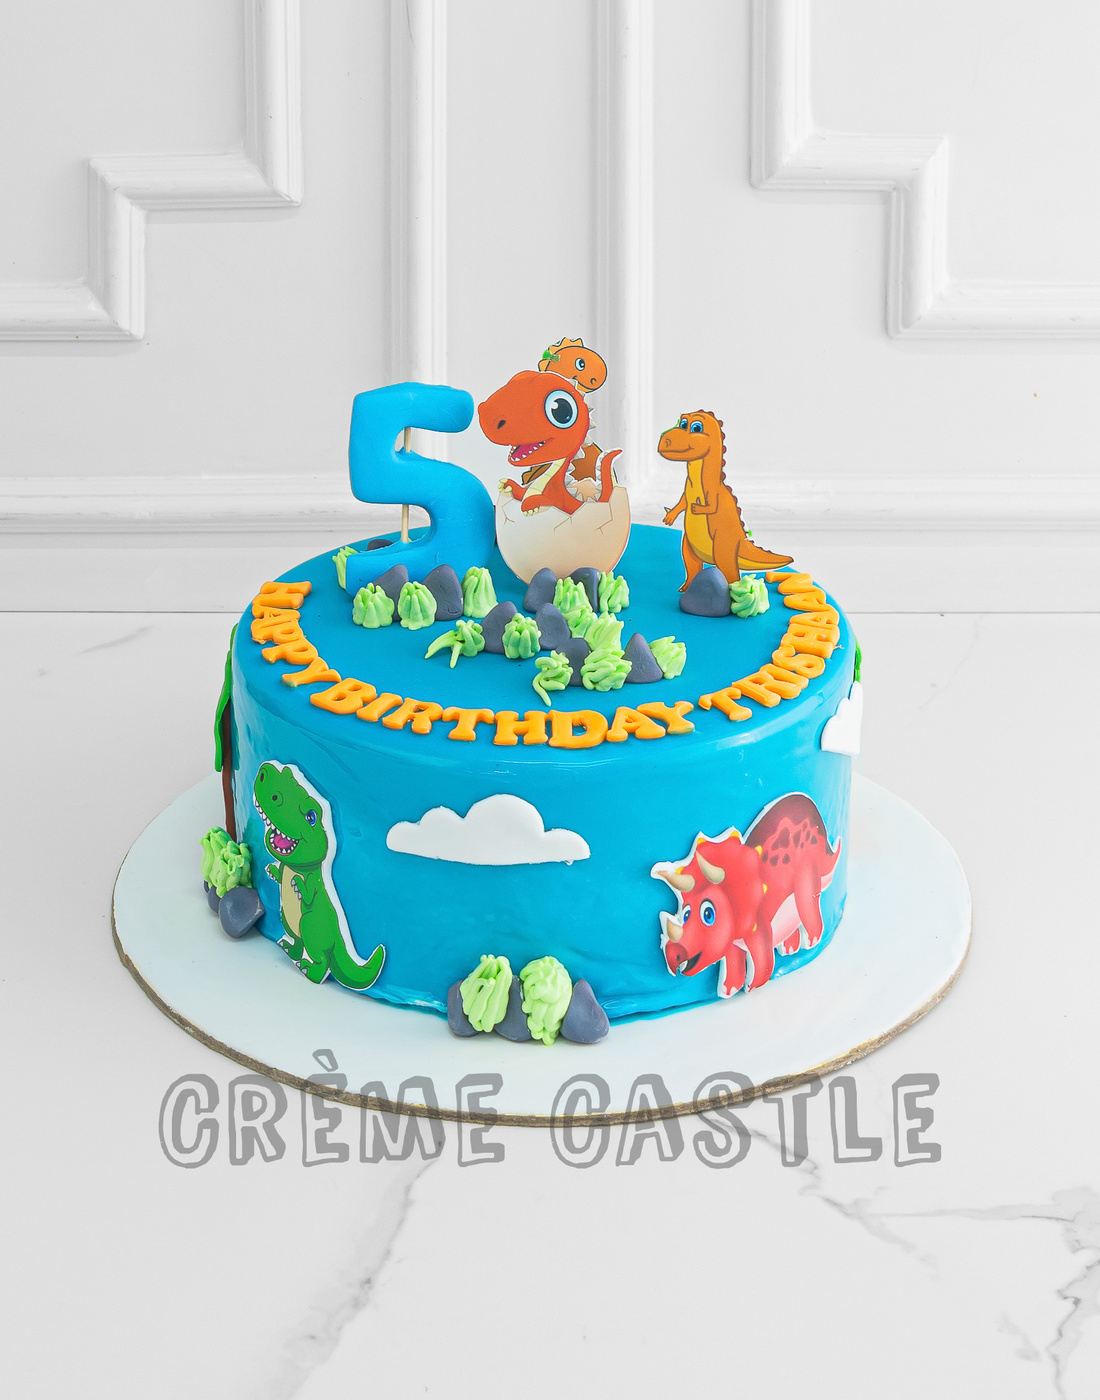 Dinosaur Birthday Cakes for Dino-Obsessed Boys and Girls | Cakes by Robin